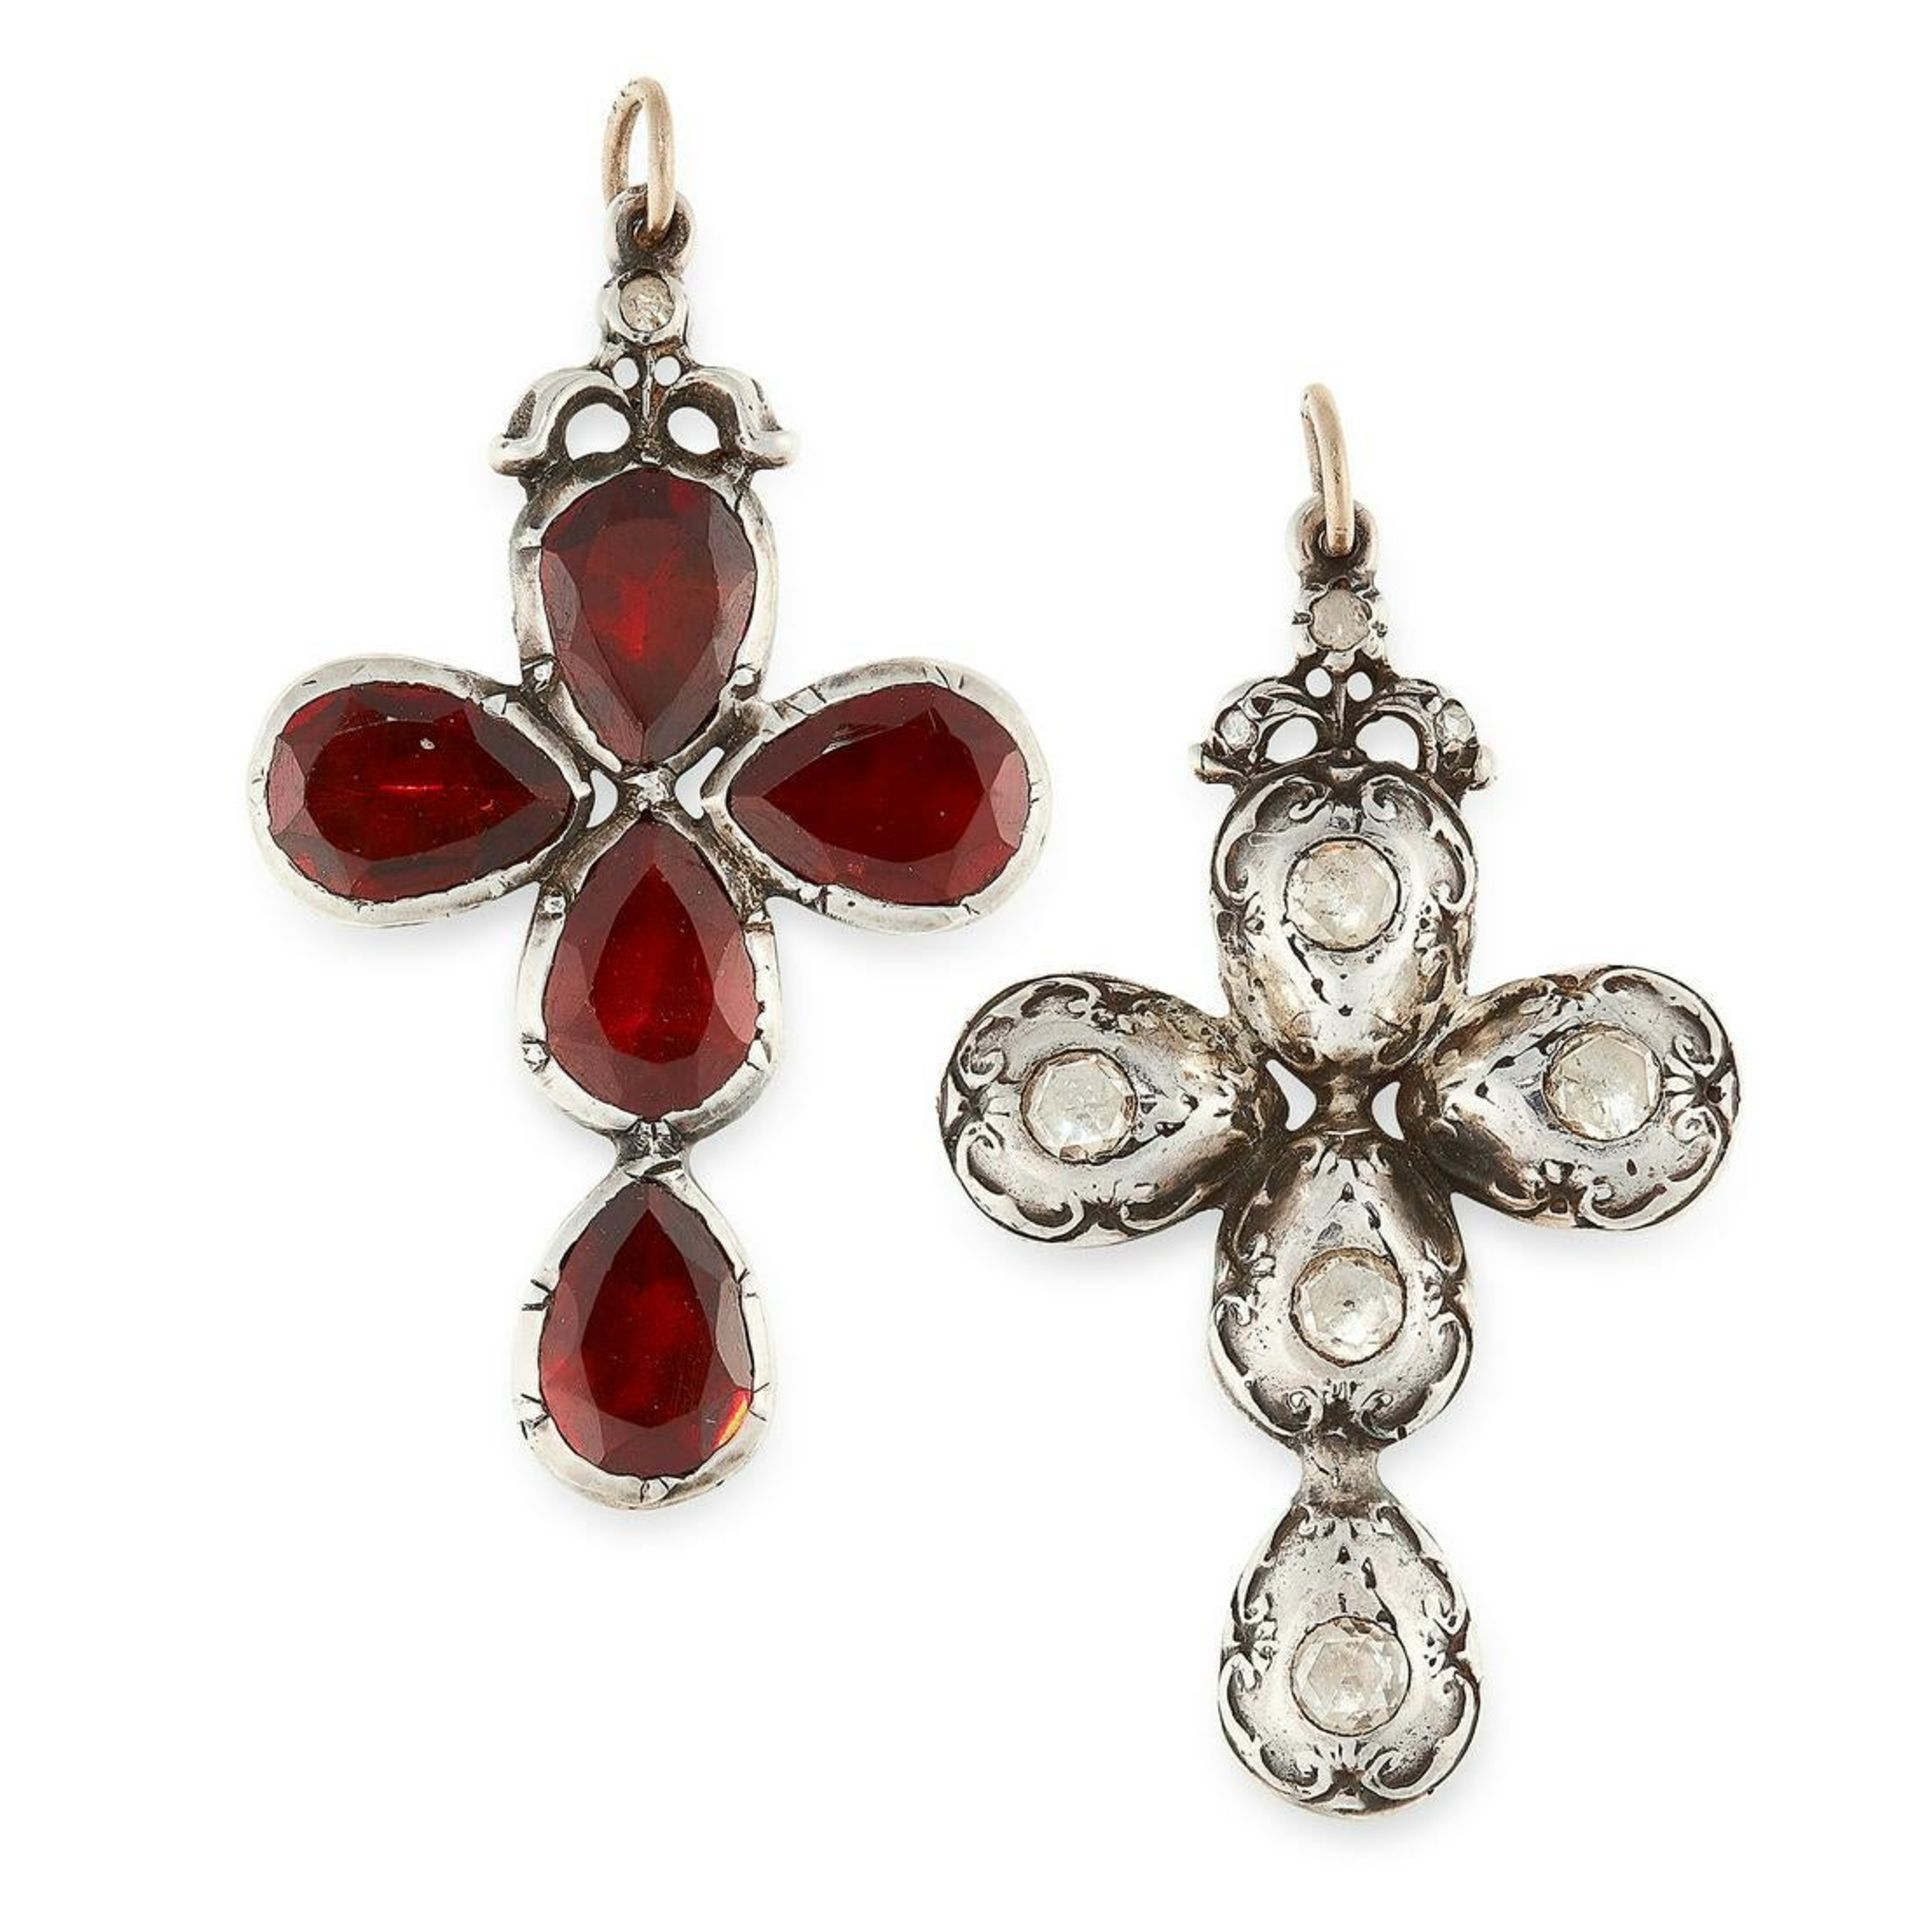 AN ANTIQUE DIAMOND AND GARNET CROSS PENDANT, 18TH OR 19TH CENTURY in silver, formed as a cross, - Image 2 of 2